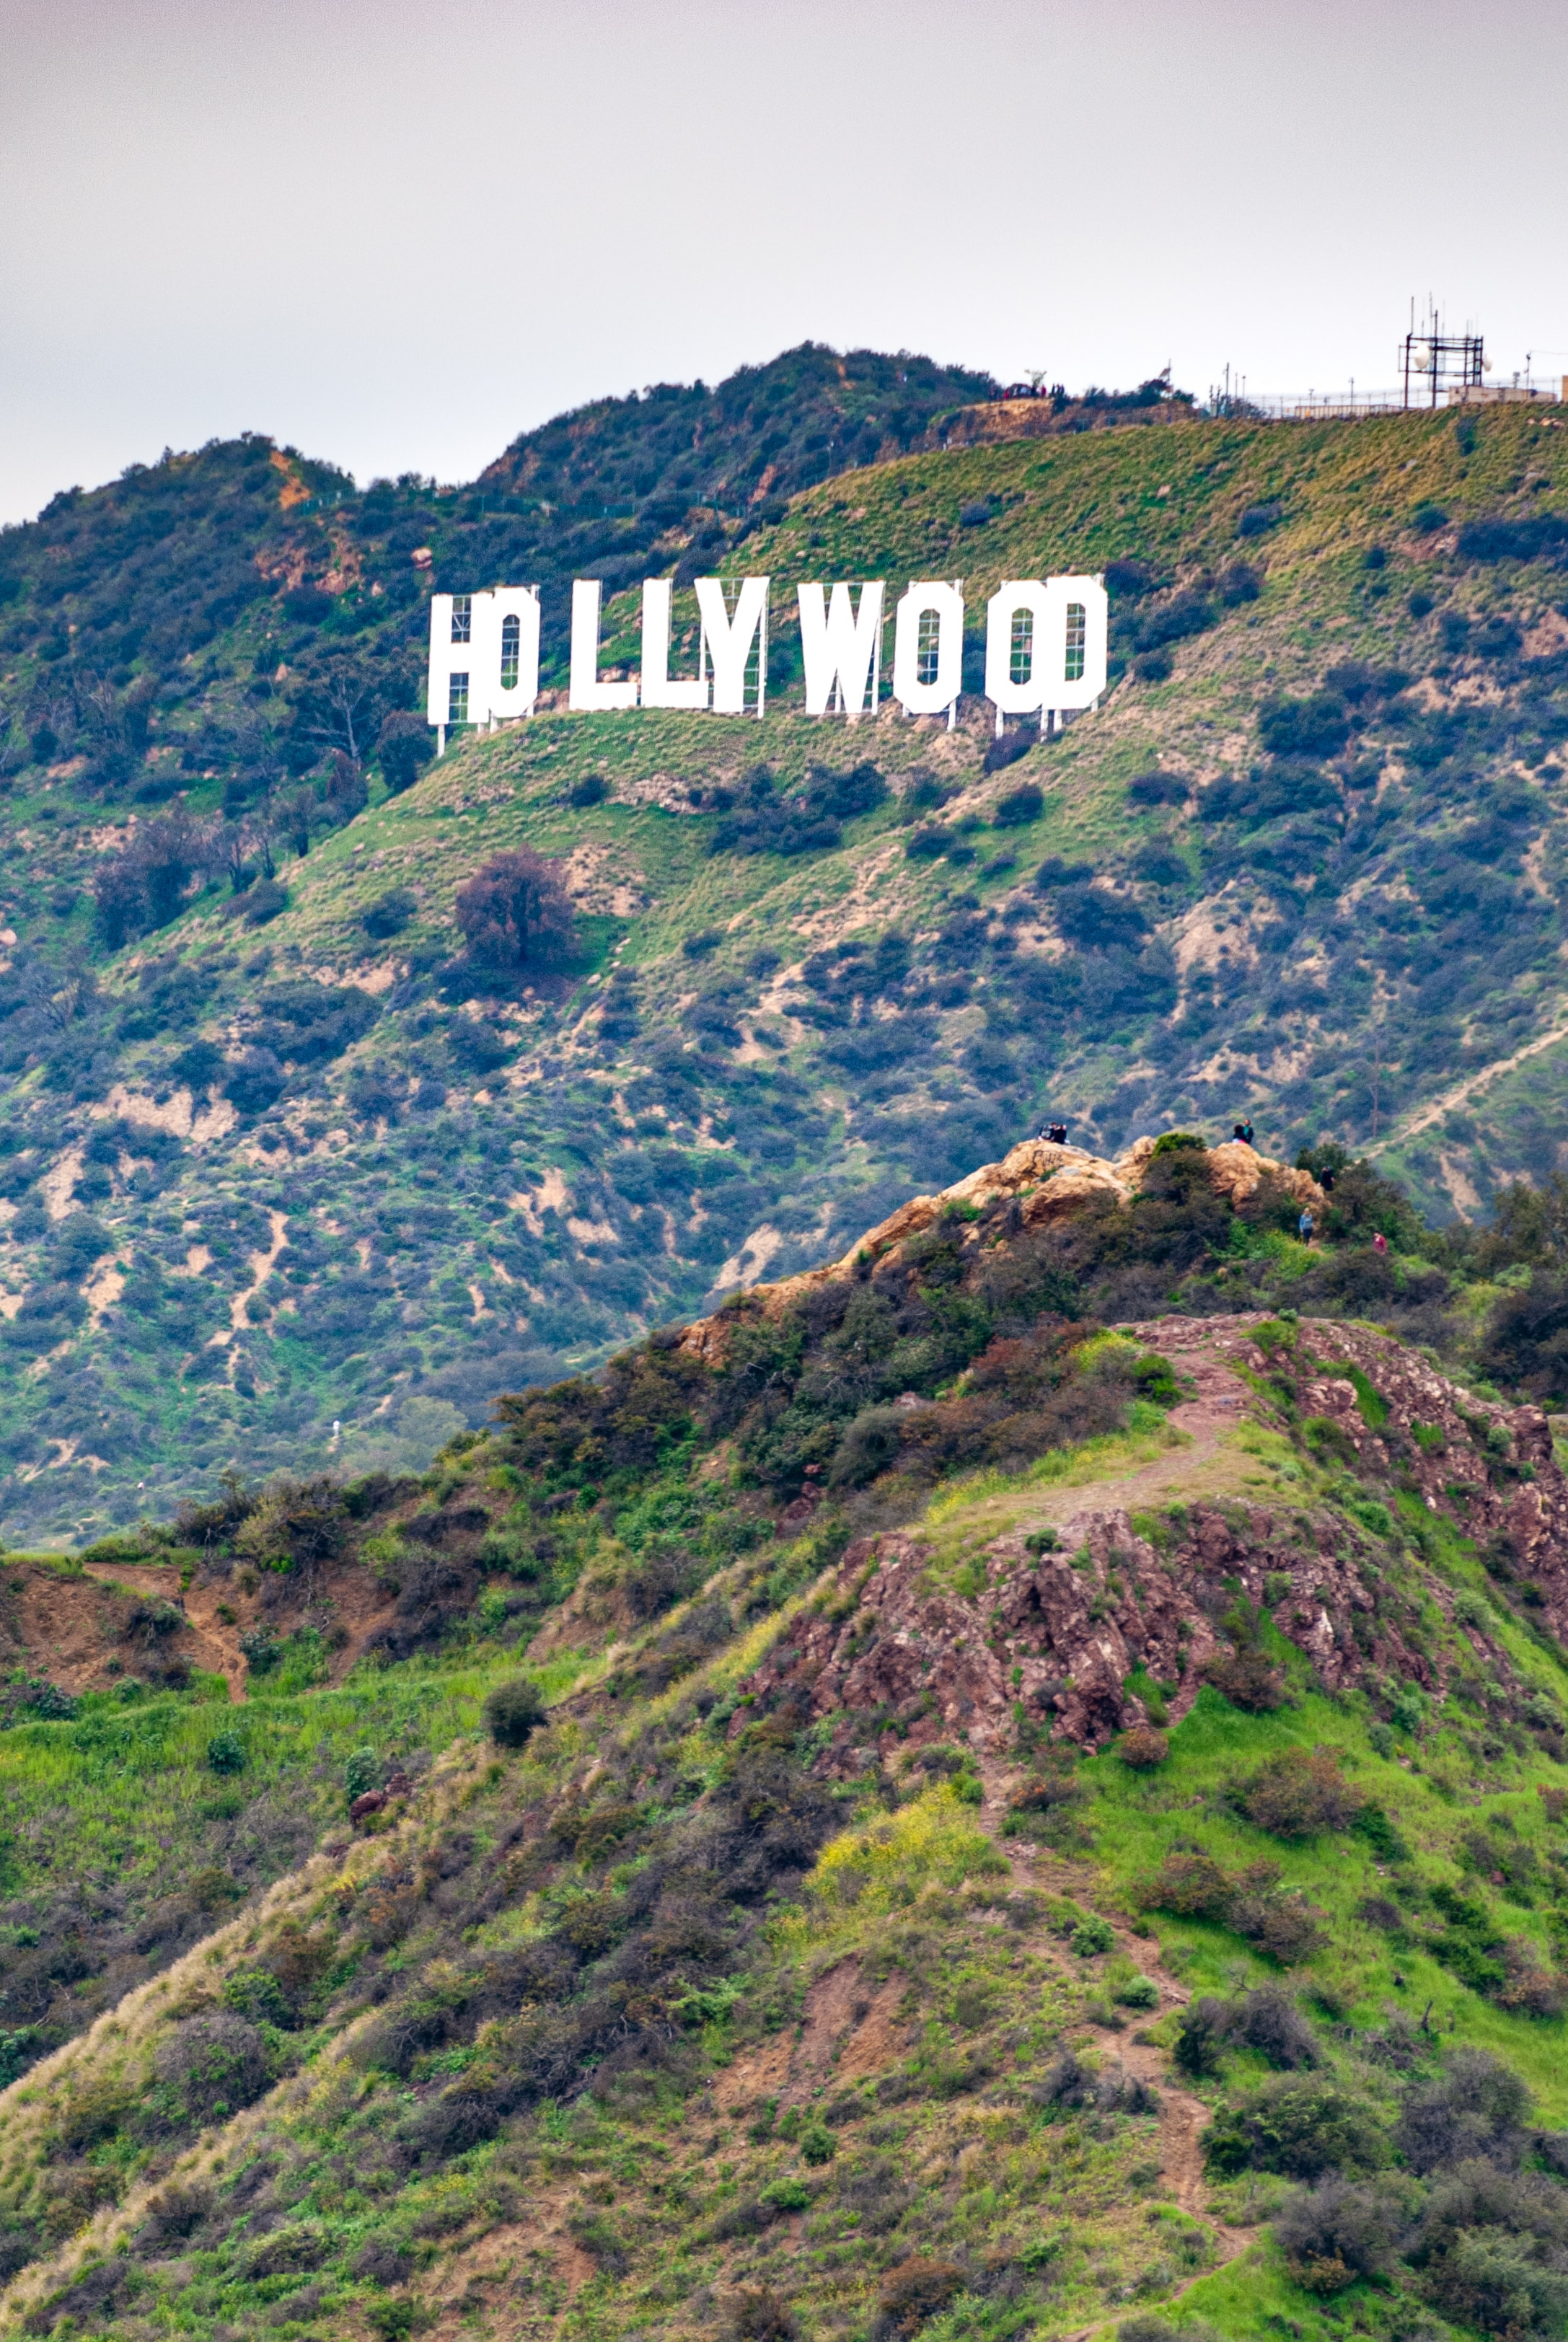 PC Wallpapers rocks, words, inscription, slope, word, hollywood